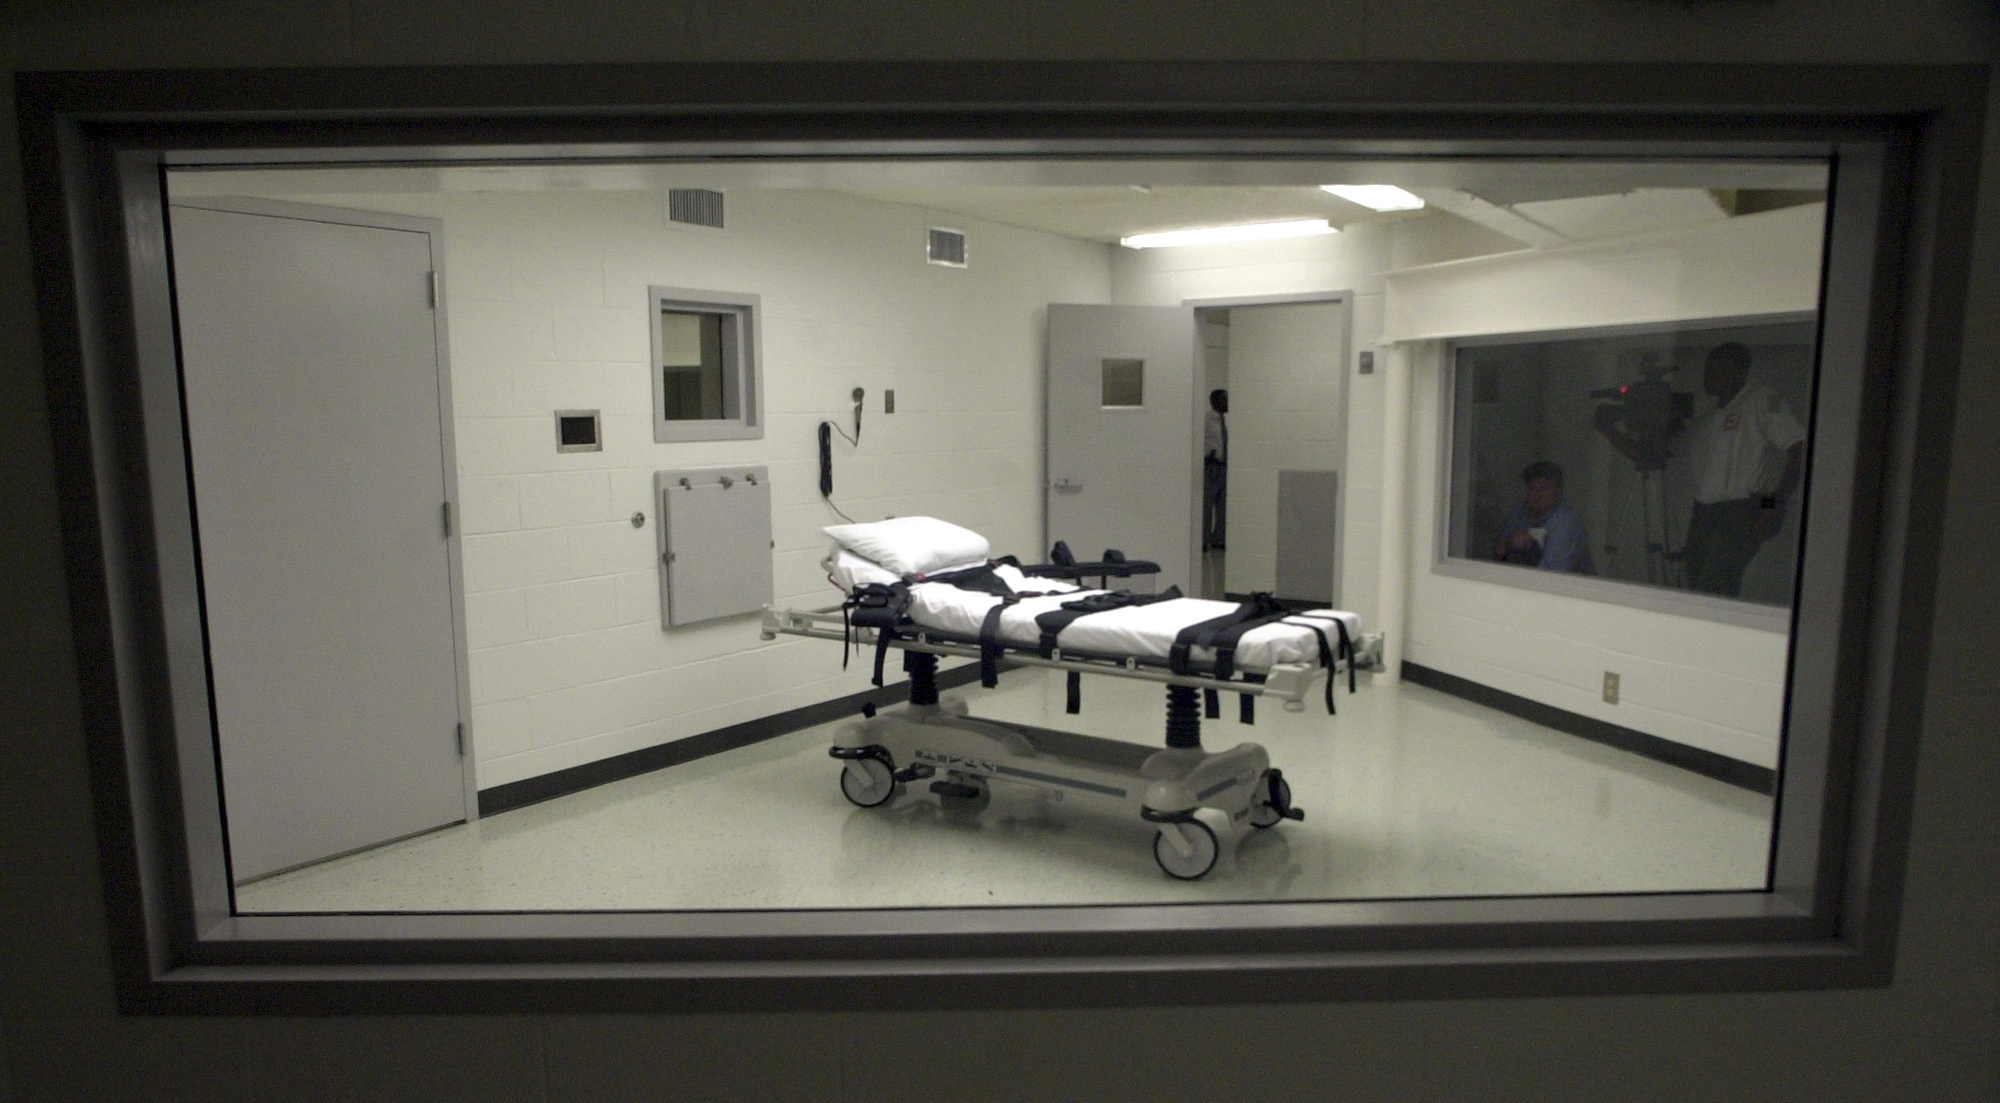 alabama plans first nitrogen gas execution after failed lethal injection